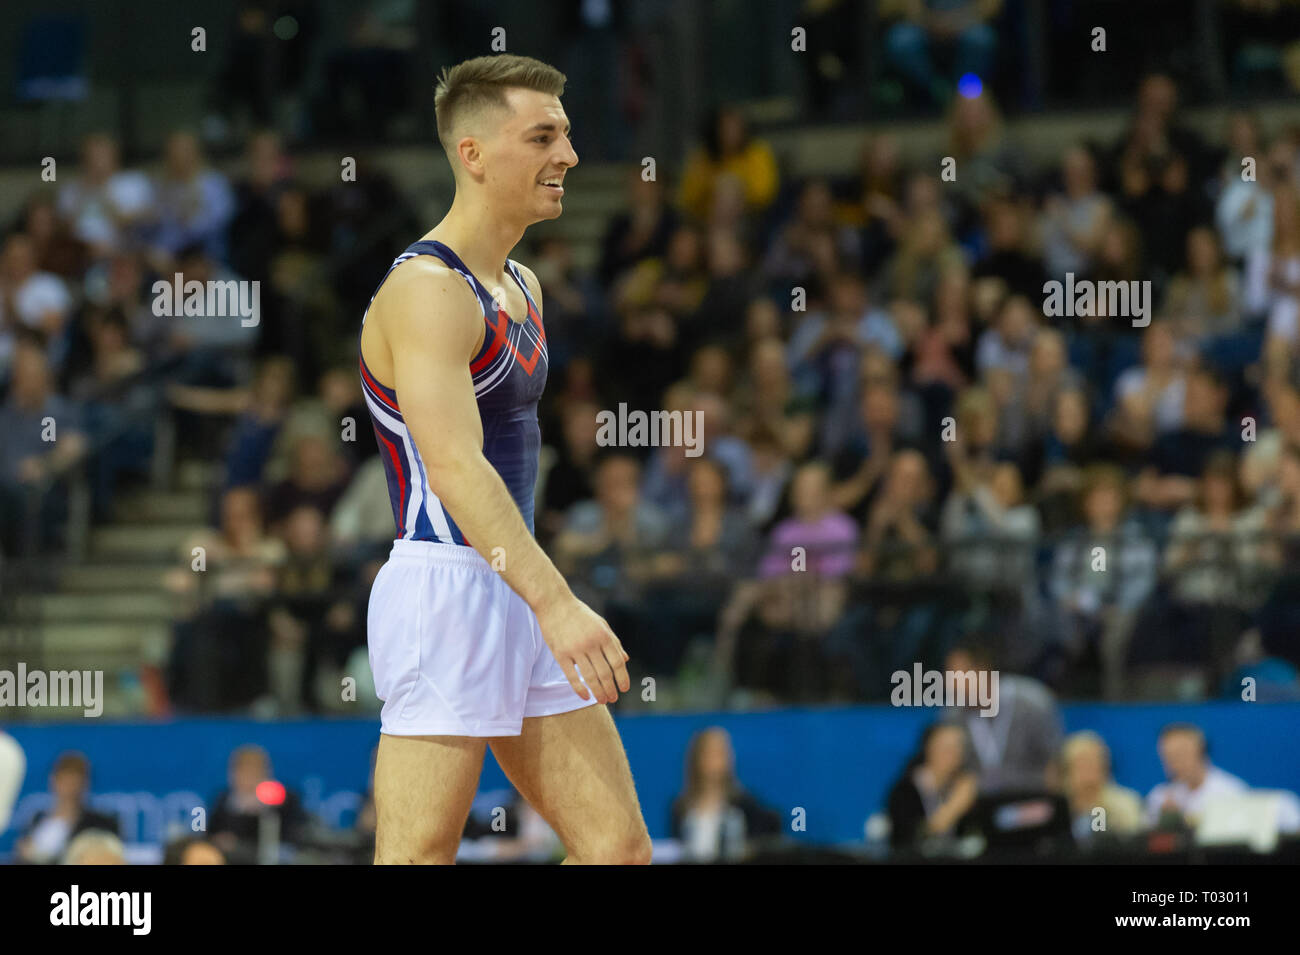 Liverpool, UK. 17th March 2019. Max Whitlock, MBE of South Essex Gymnastics competing at the Men’s and Women’s Artistic British Championships 2019, M&S Bank Arena, Liverpool, UK. Stock Photo